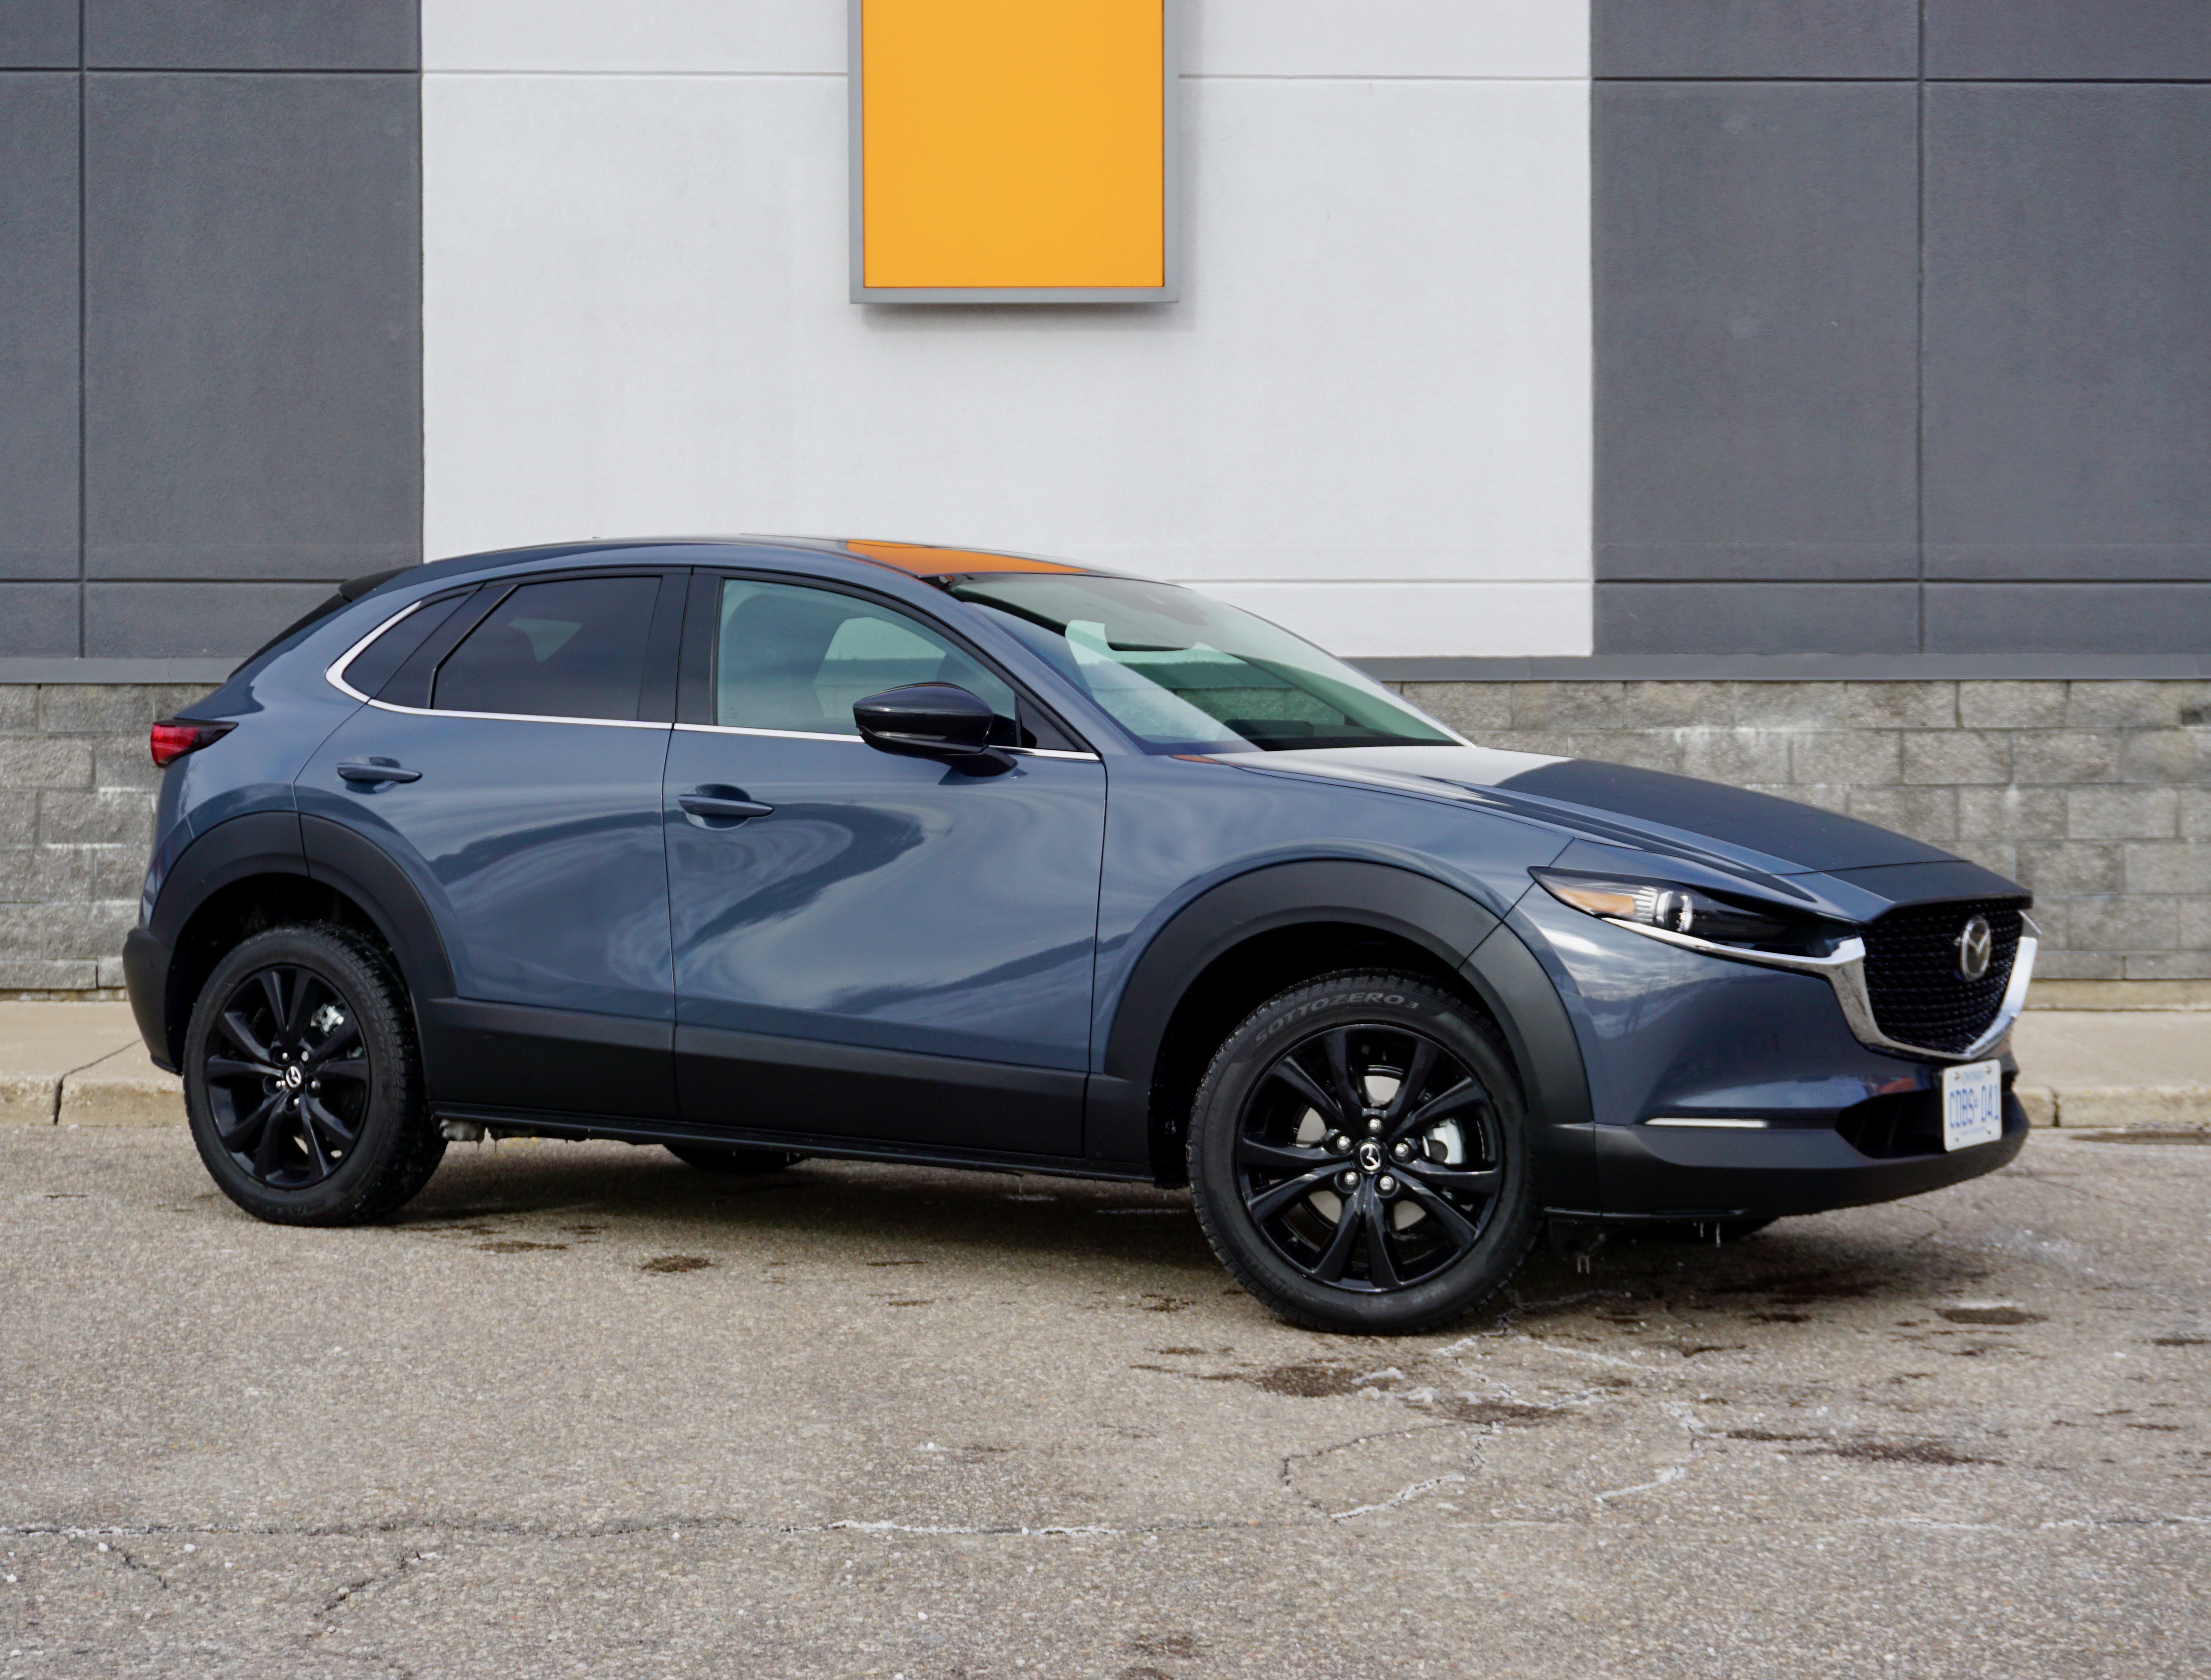 Review: The turbocharged Mazda CX-30 GT 2.5T crossover is in a